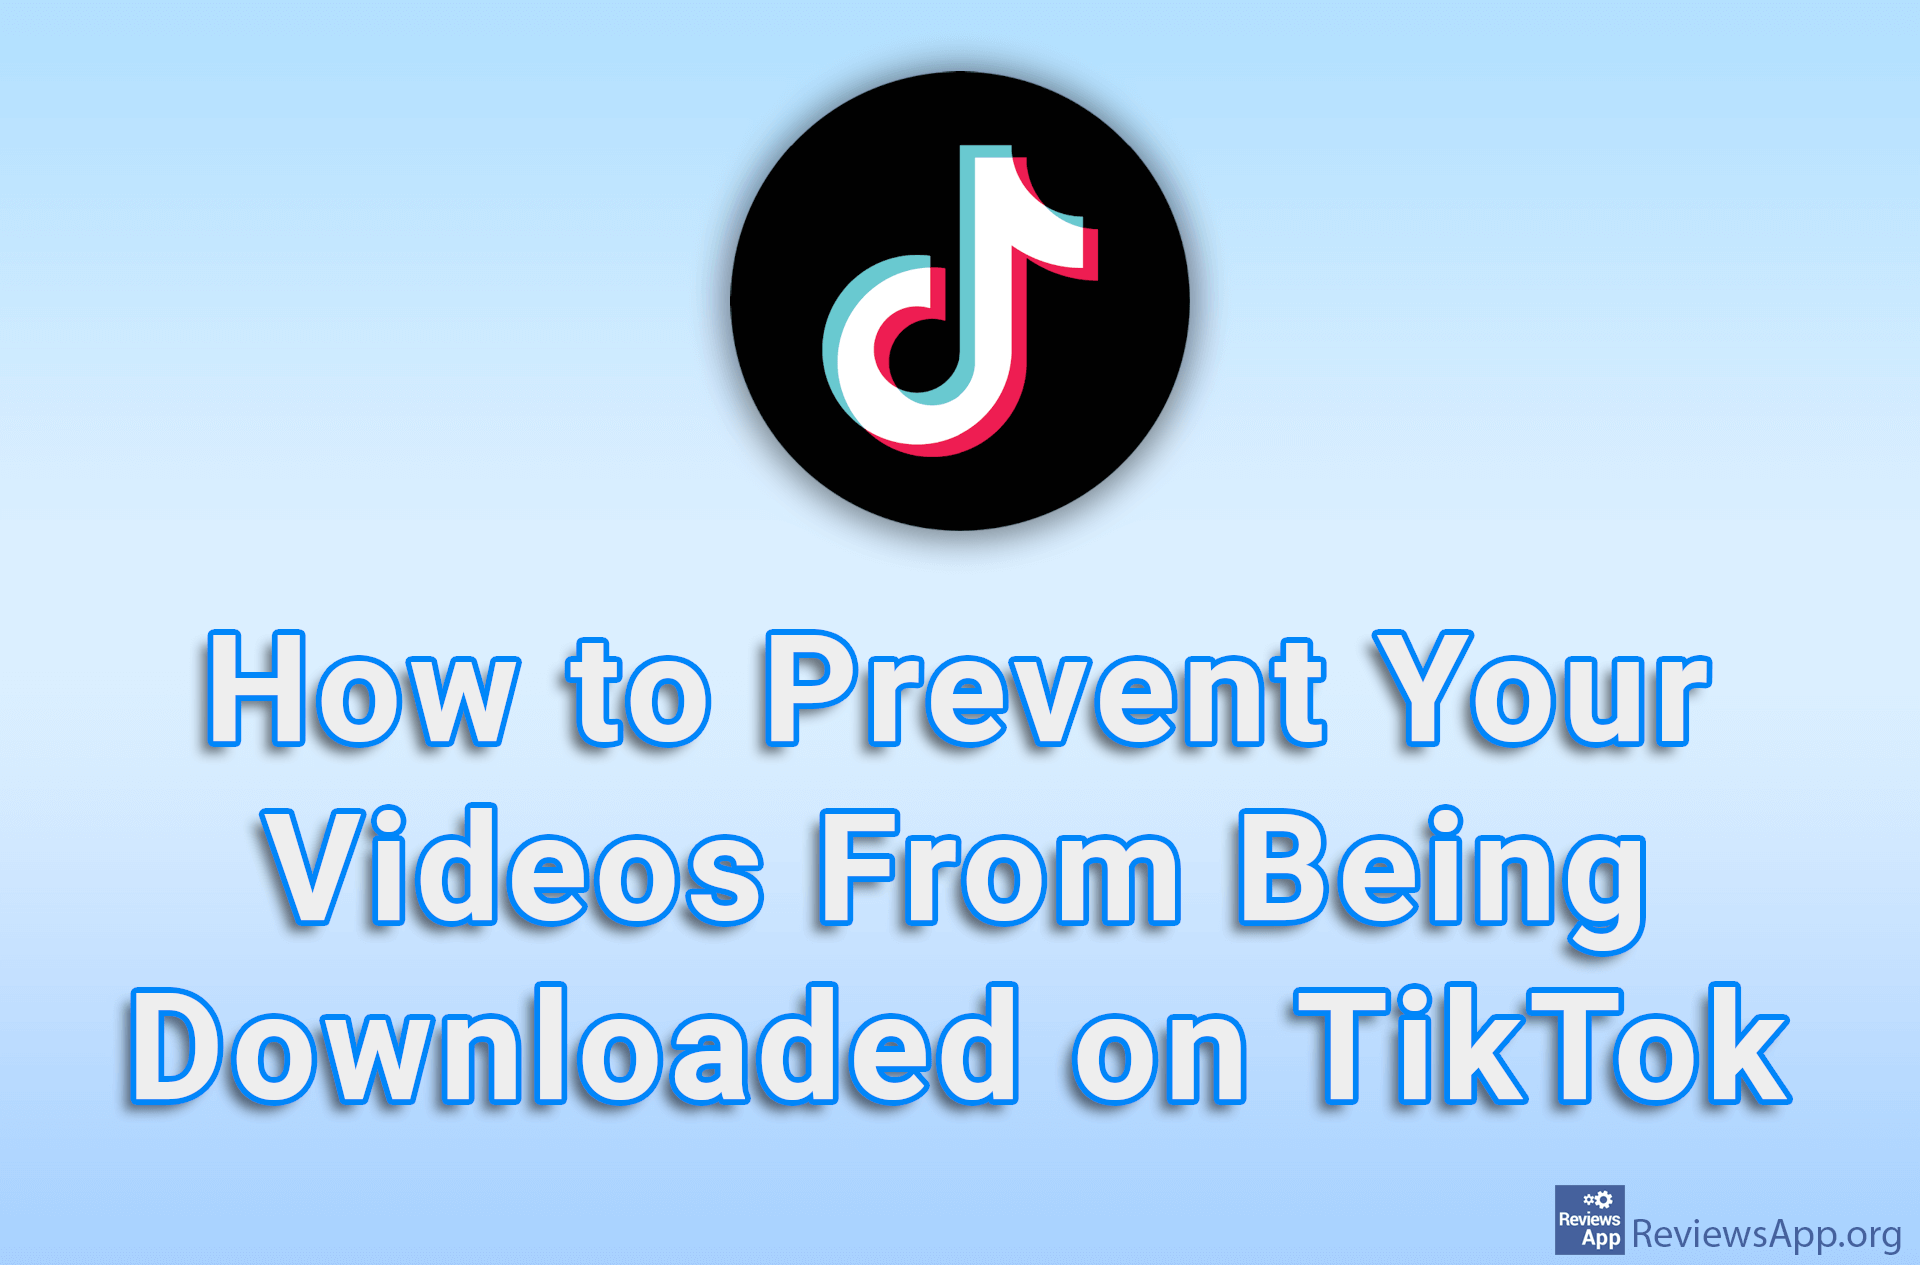 How to Prevent Your Videos From Being Downloaded on TikTok